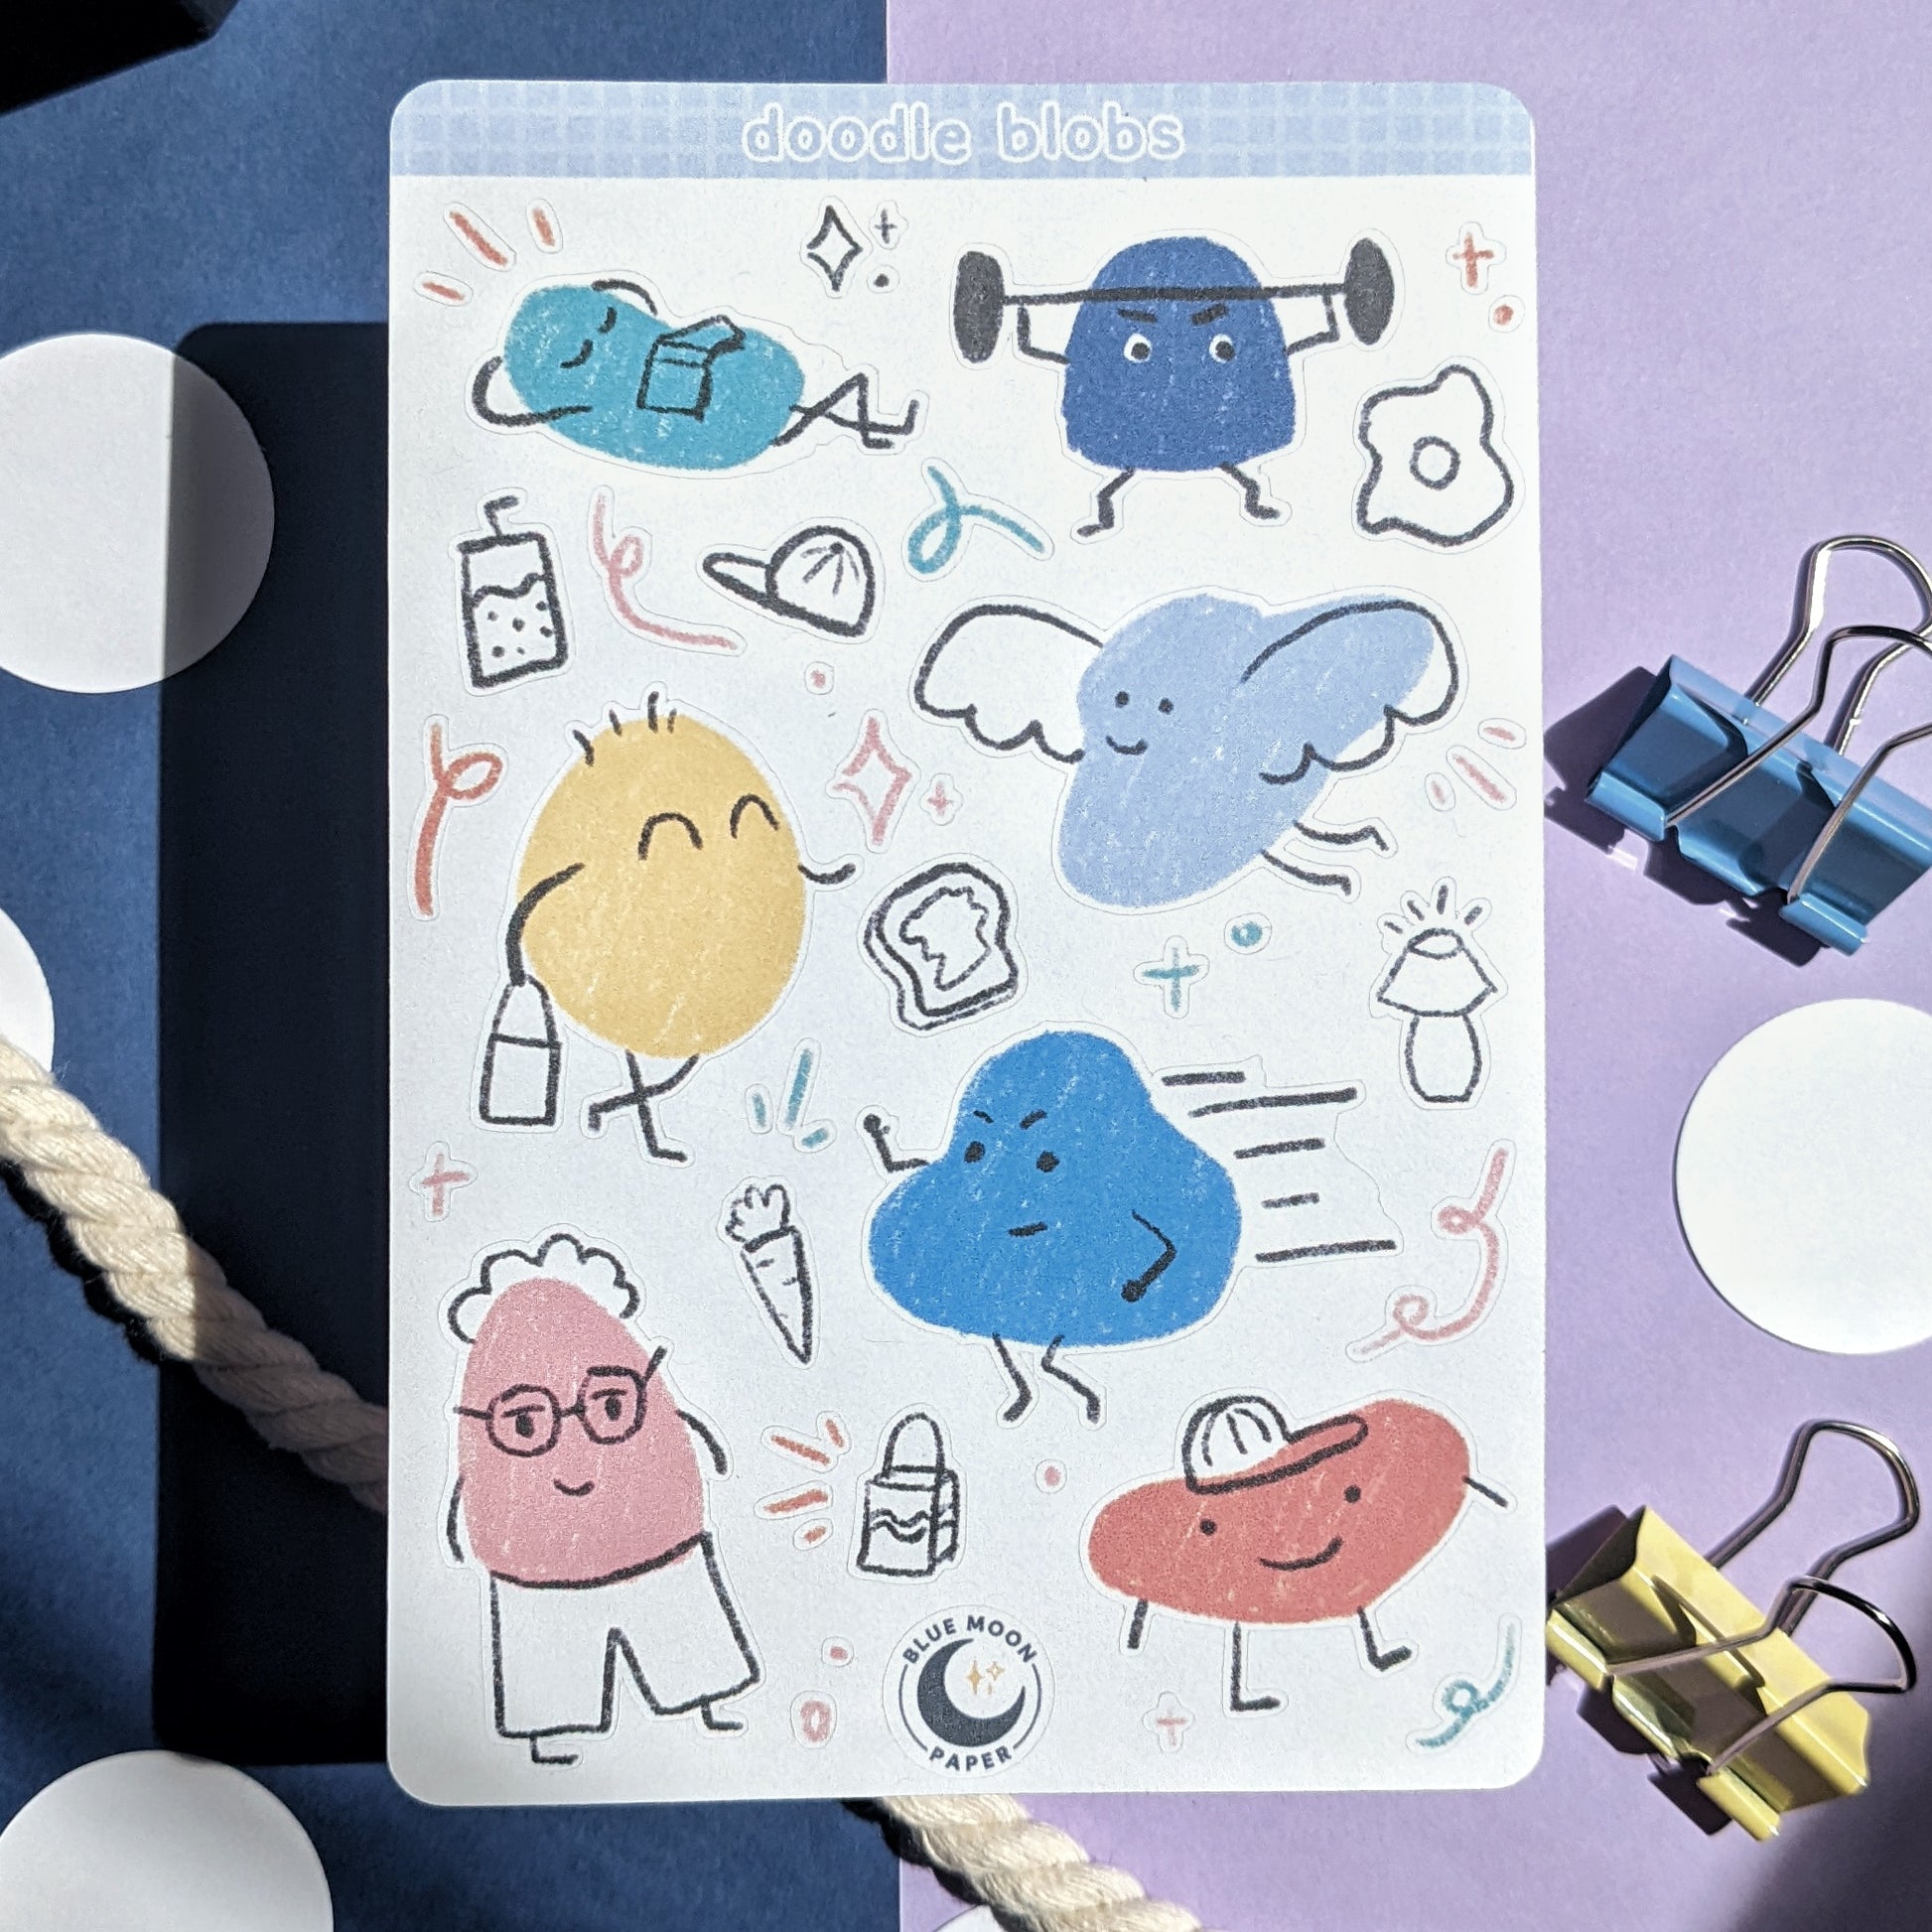 Sticker sheet with brightly coloured blobs with faces, doing various activities like running, sleeping, and lifting weights.